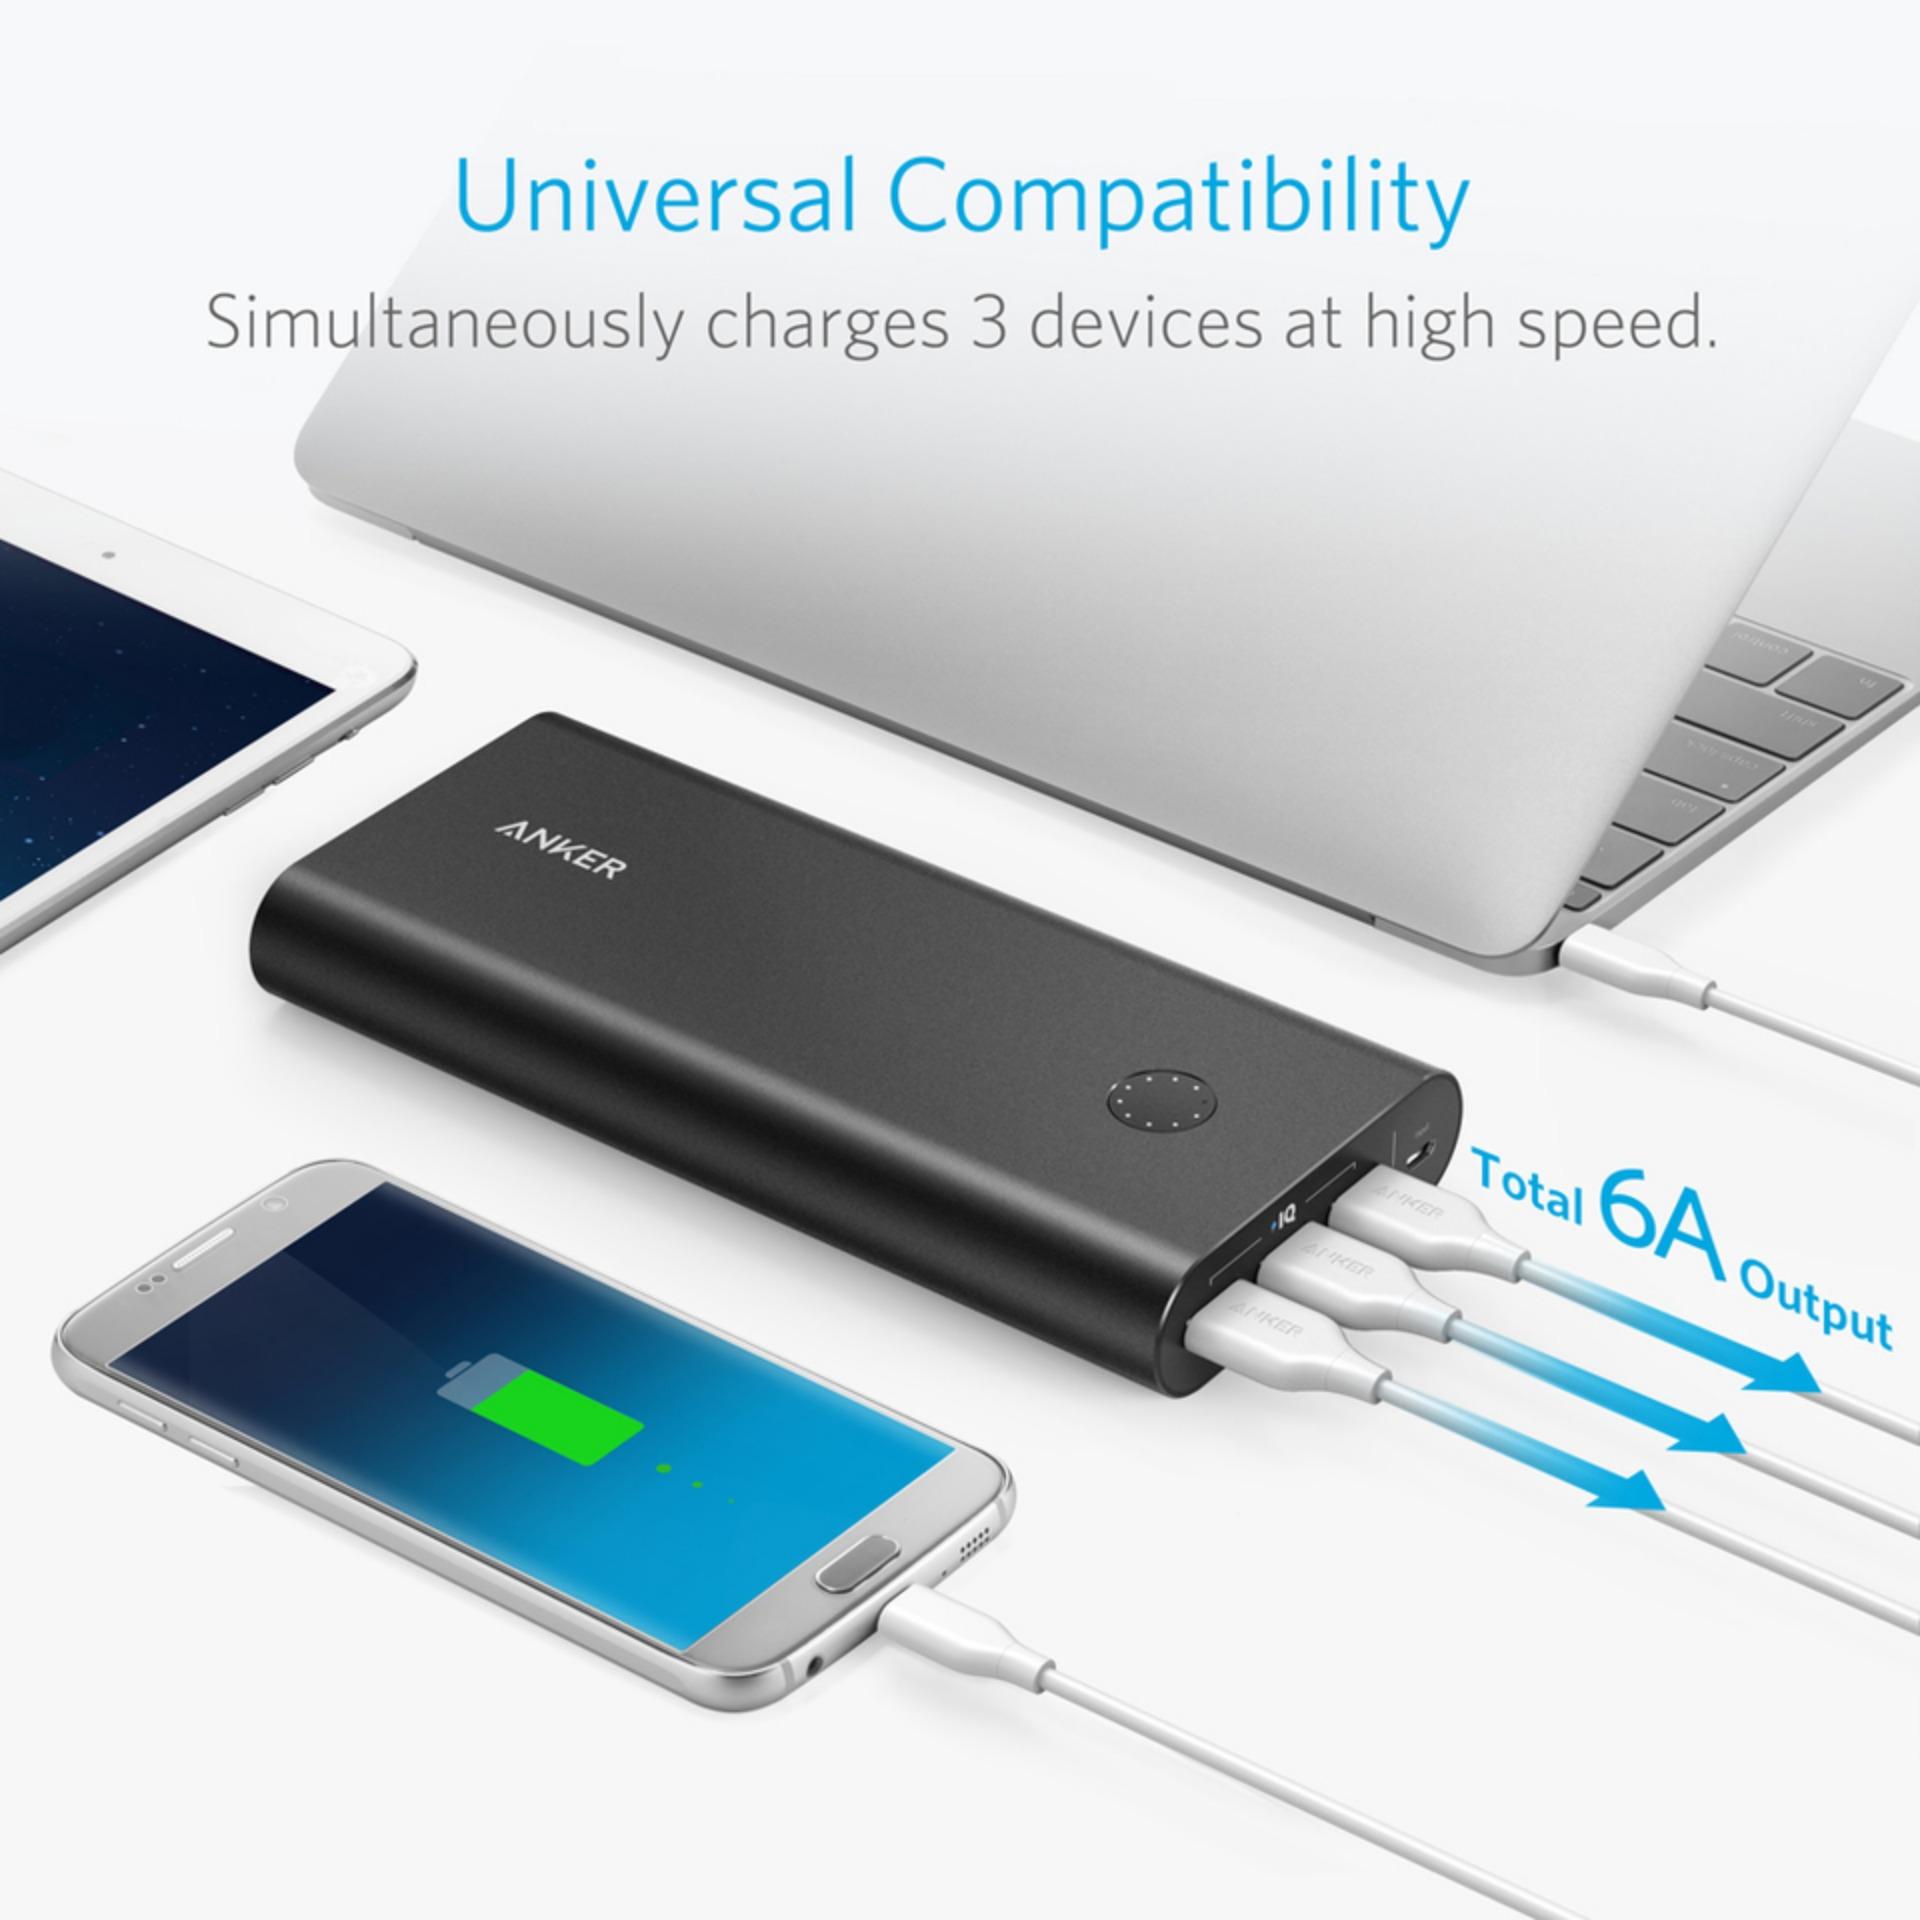 Anker PowerCore+ 26800mAh & Quick Charge 3.0 Charger (SG Plug)